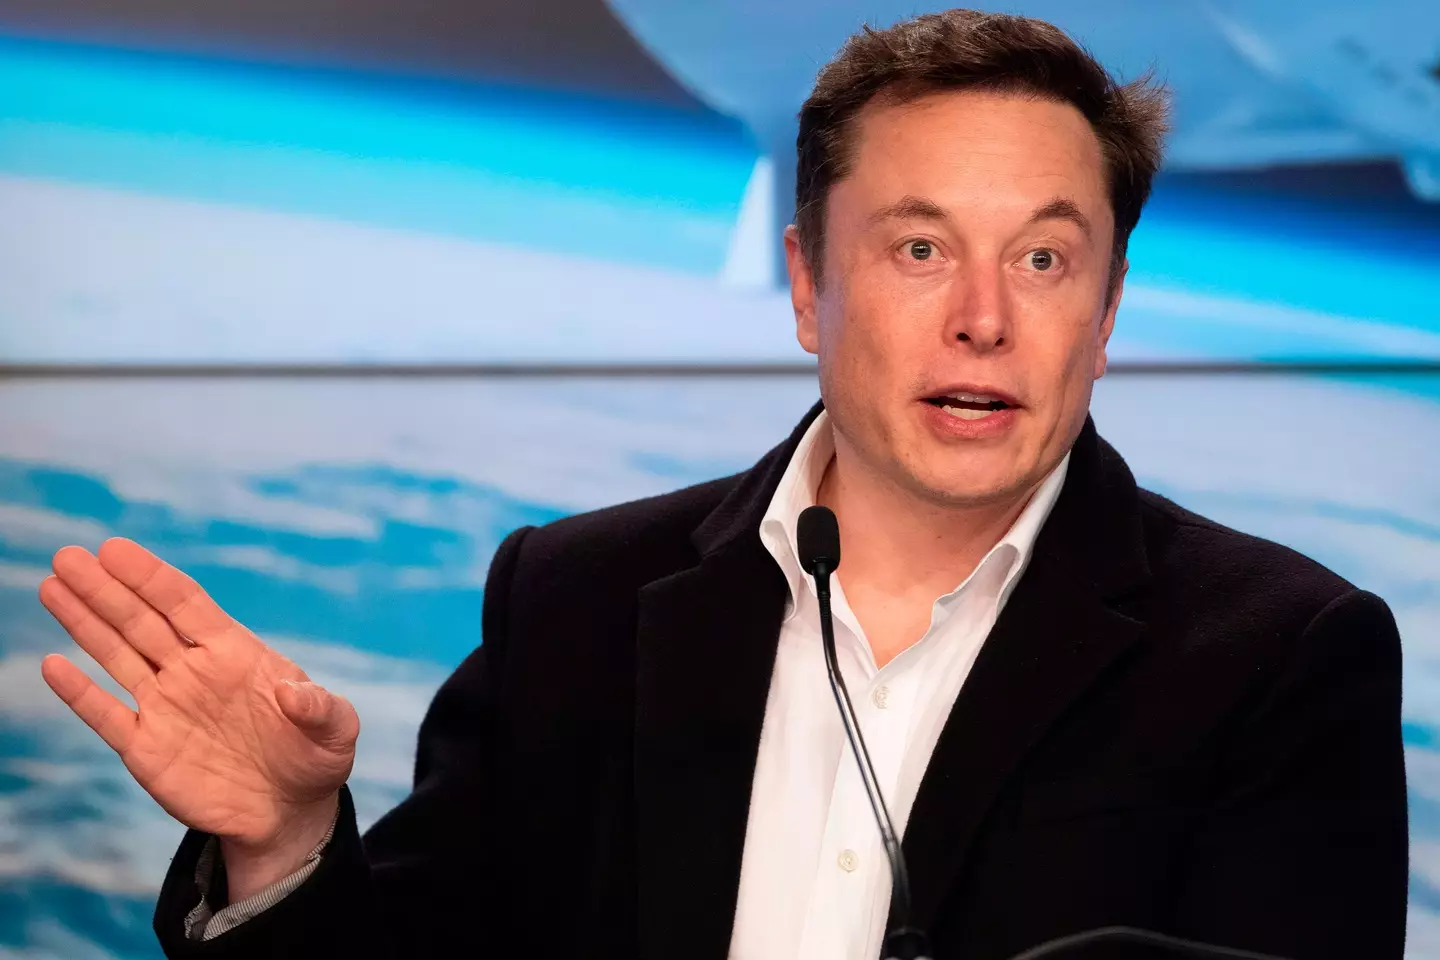 Elon Musk shared a suggested word change from Microsoft Word that has sparked debate.